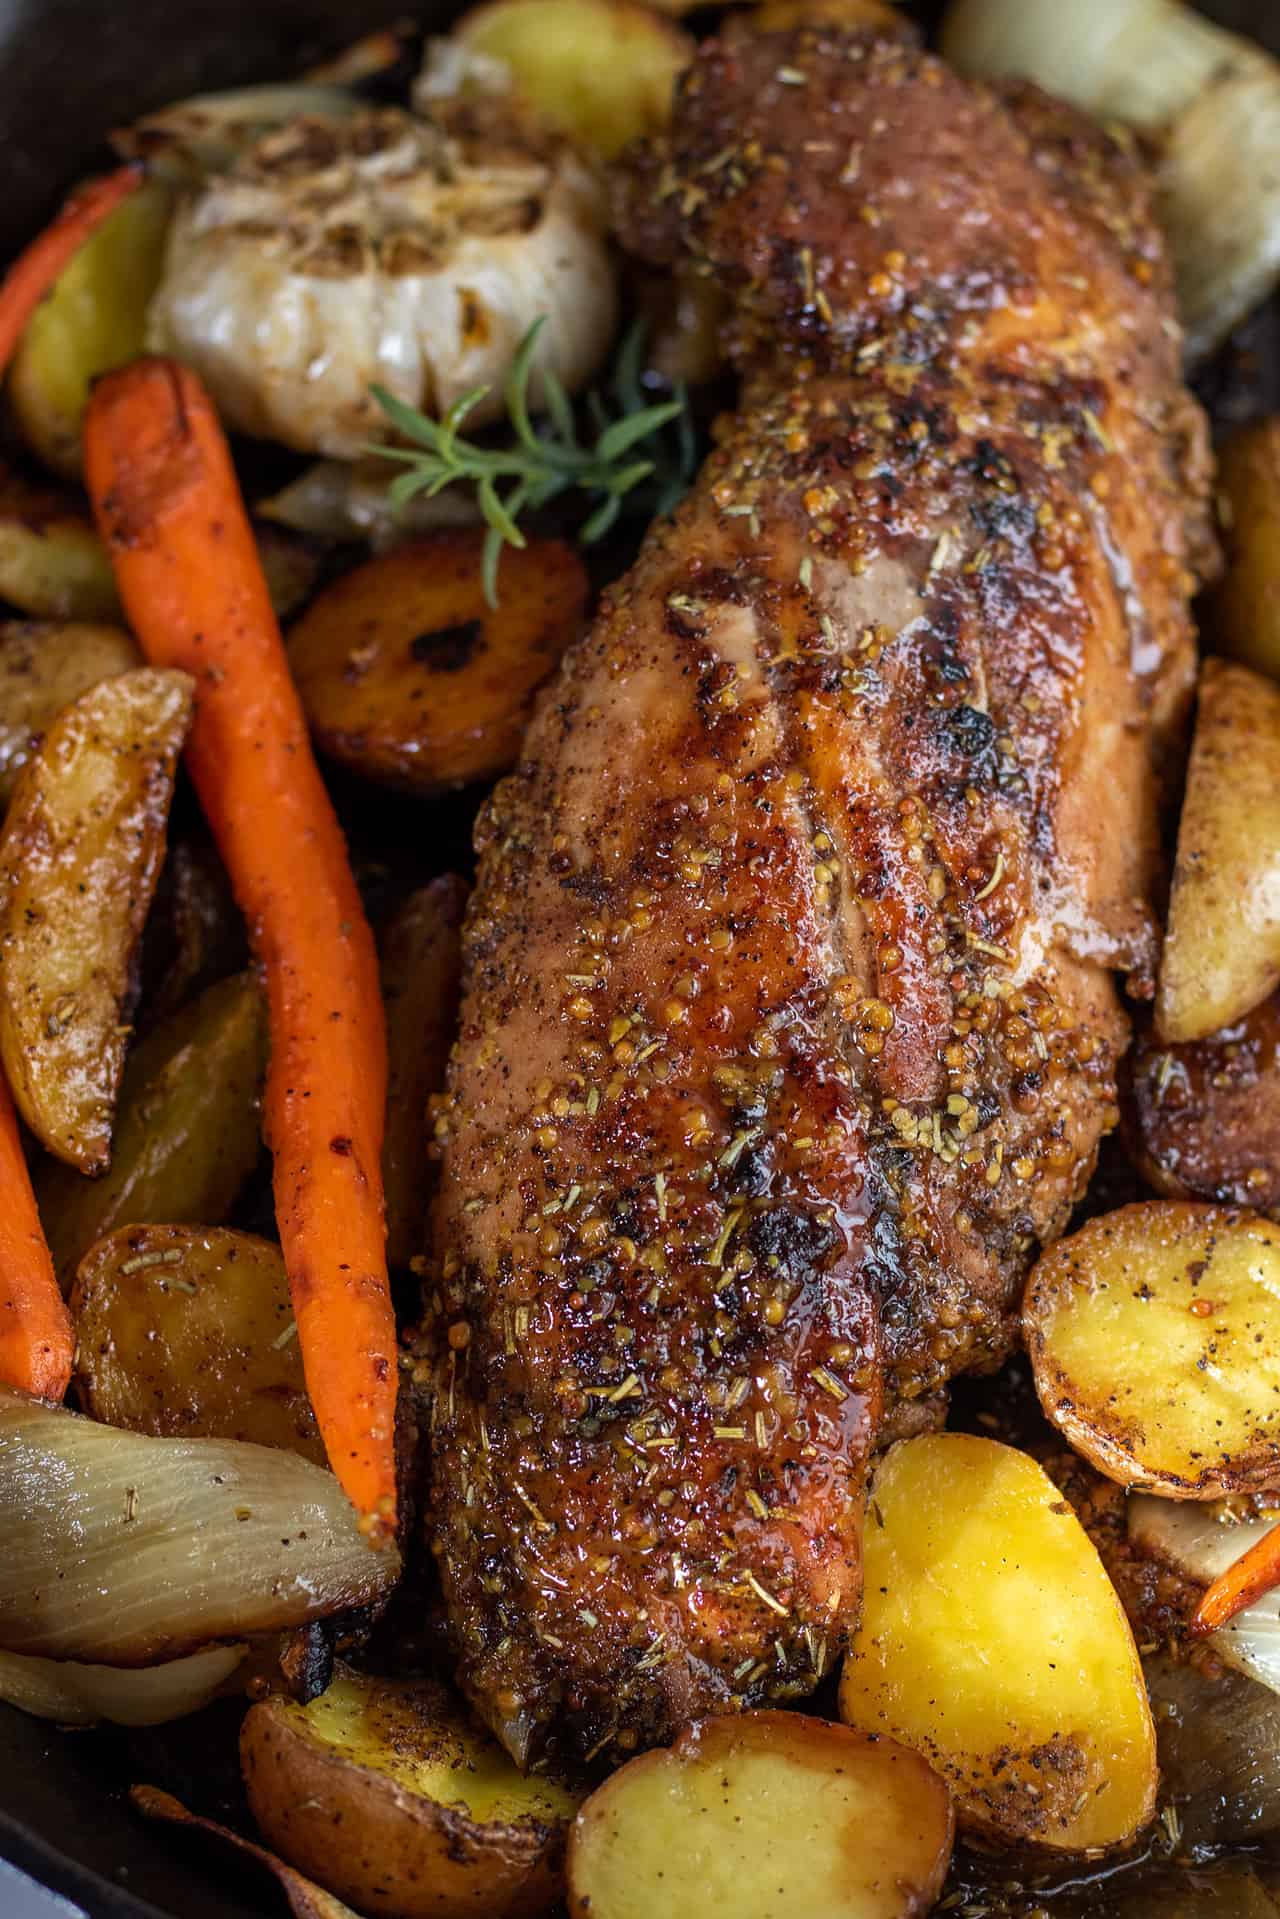 A whole oven roasted pork tenderloin that's been cooked in the oven. It's golden brown with a honey mustard glaze on top. There's roasted potatoes, carrots and onions around it.